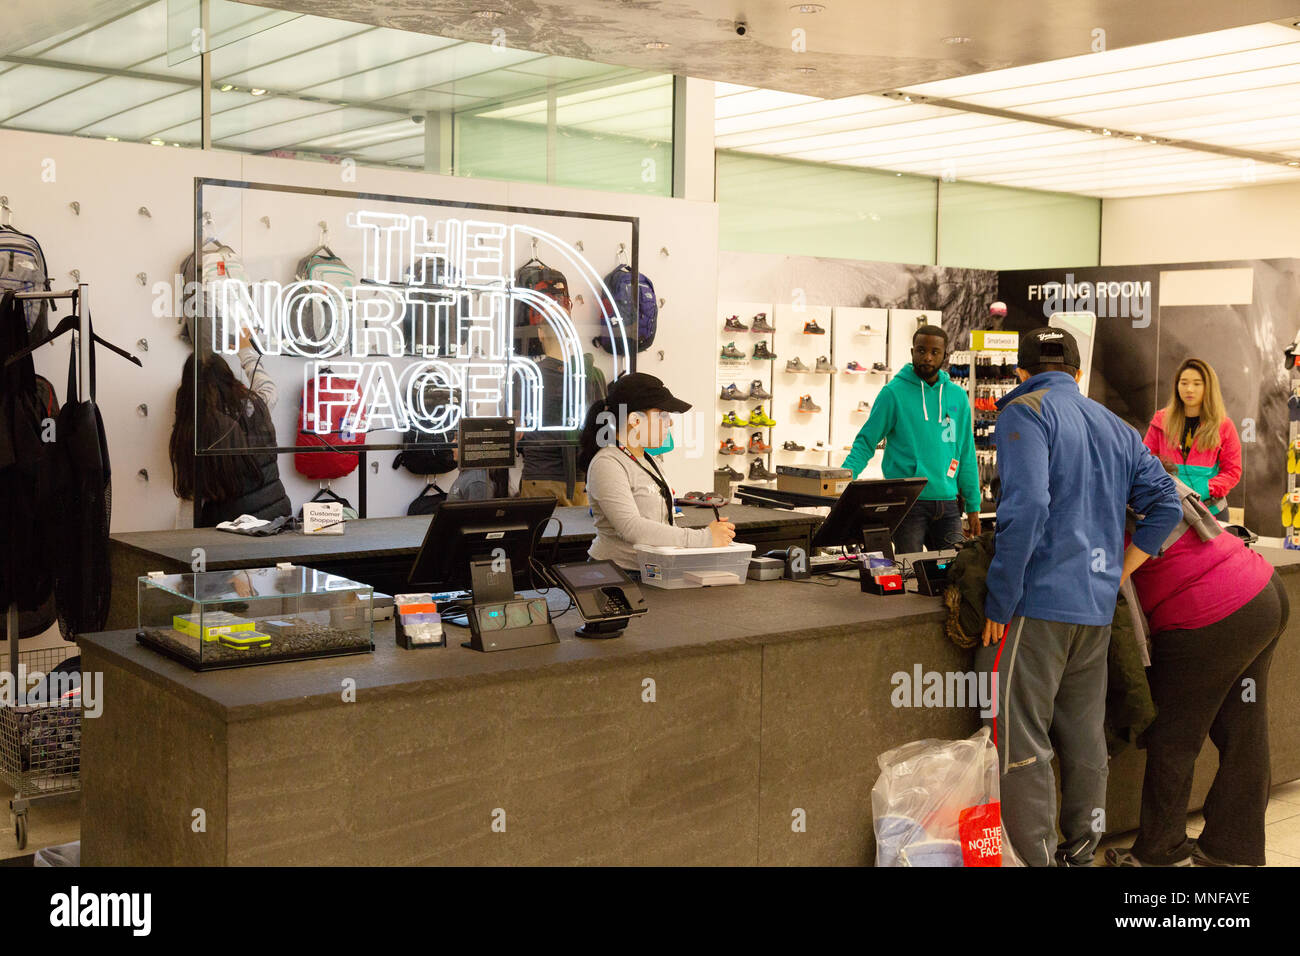 People shopping, buying clothing at the checkout, The North Face store, 5th  Avenue, New York, USA Stock Photo - Alamy